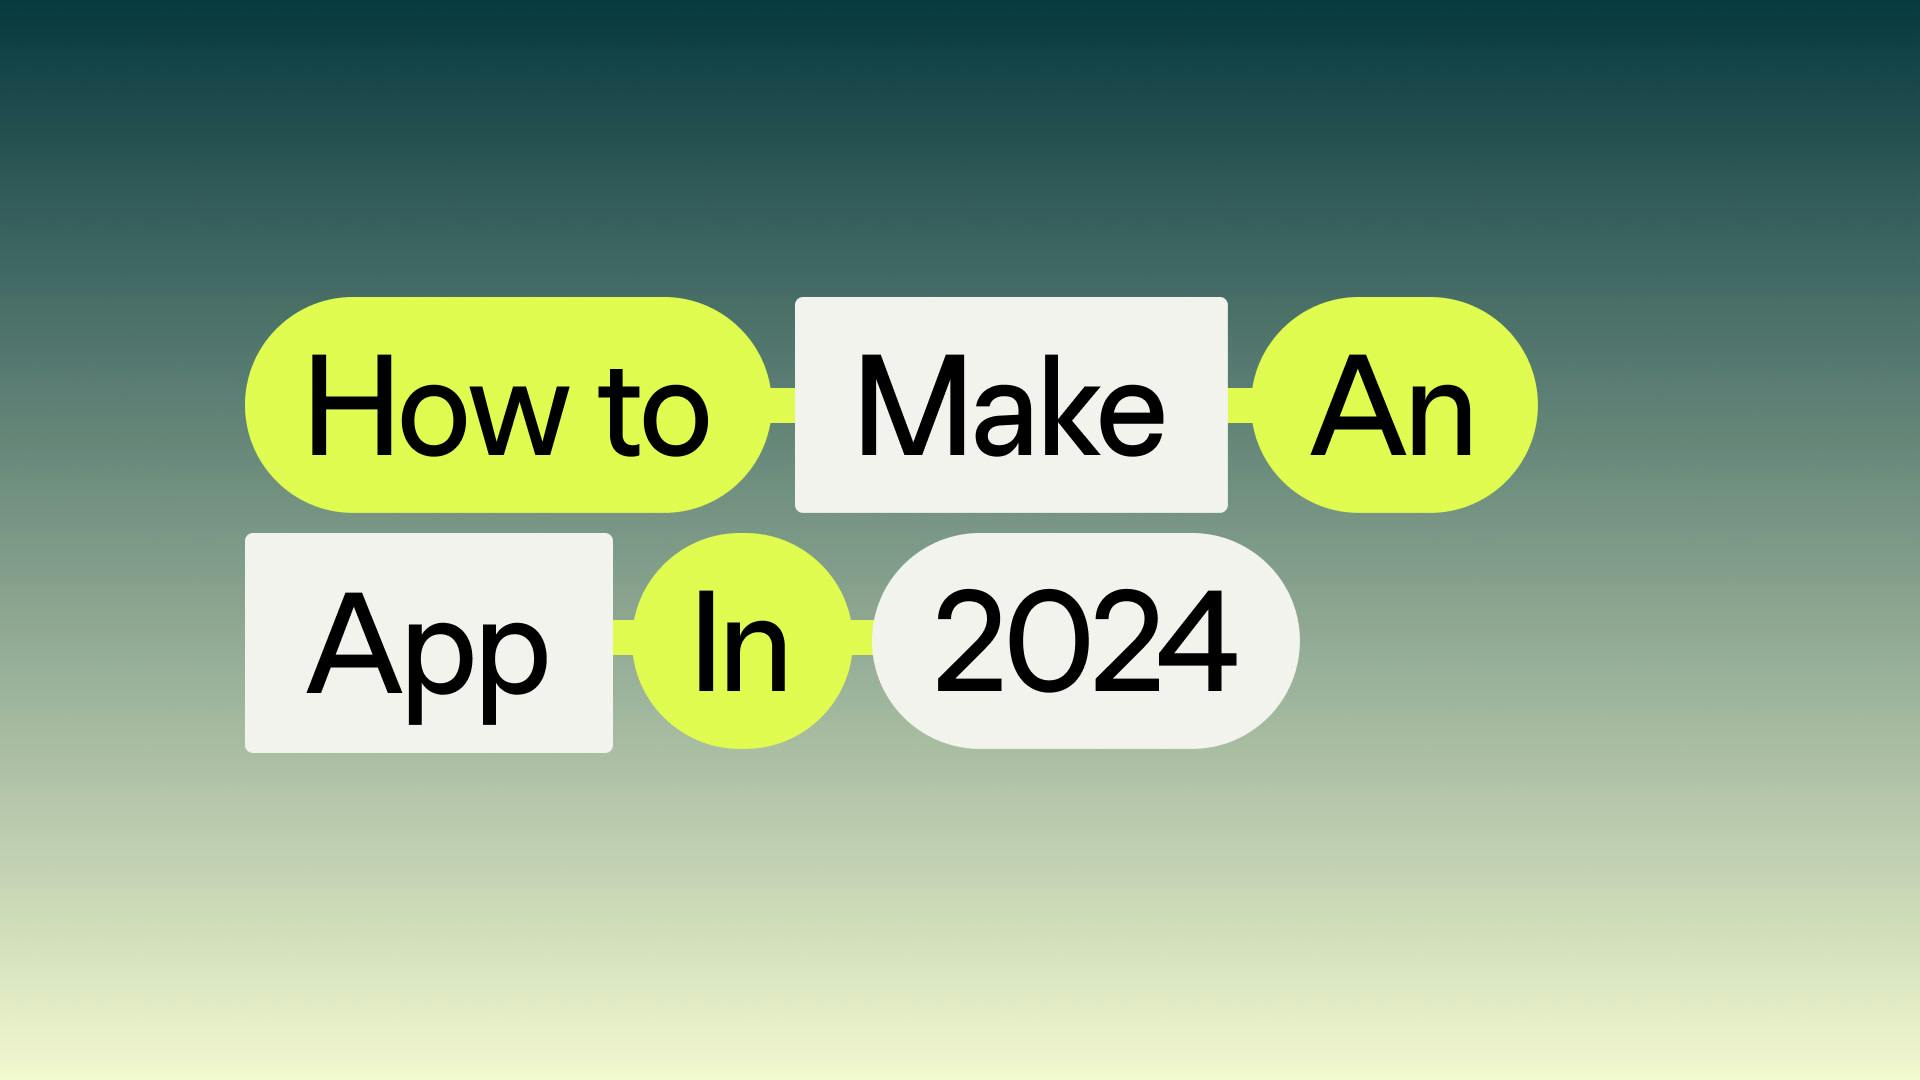 How to Make an App in 2024 - The Ultimate Guide